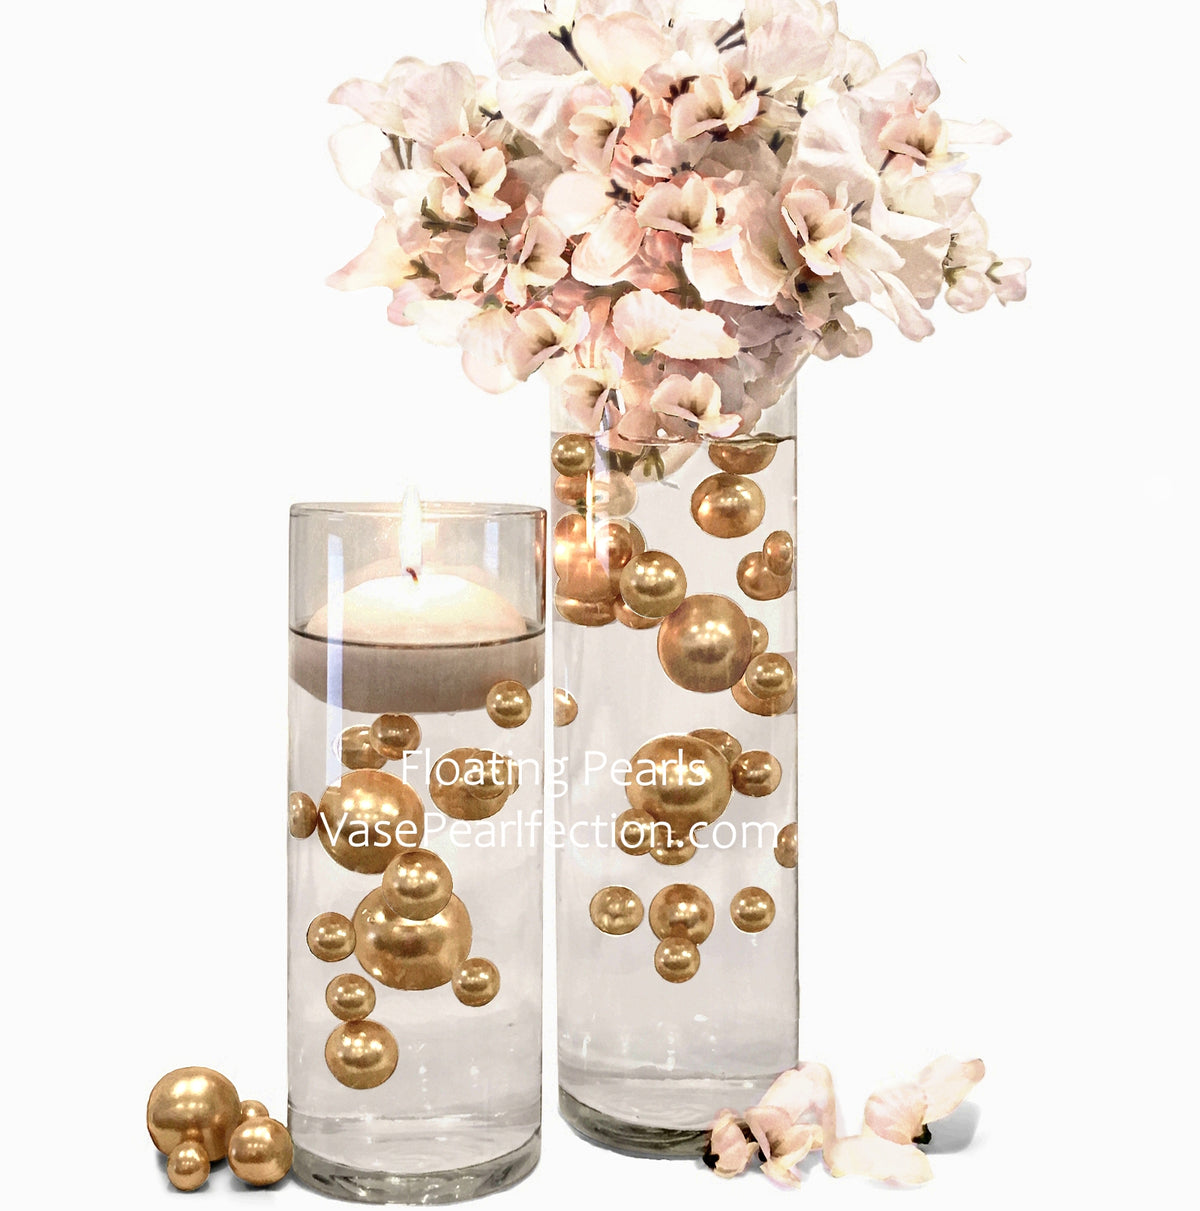 Floating Ivory-Off White Pearls - Shiny - 1 Pk Fills 1 Gallon of Gels for  Floating Effect - With Measured Gels Kit - Option 3 Fairy Lights - Vase